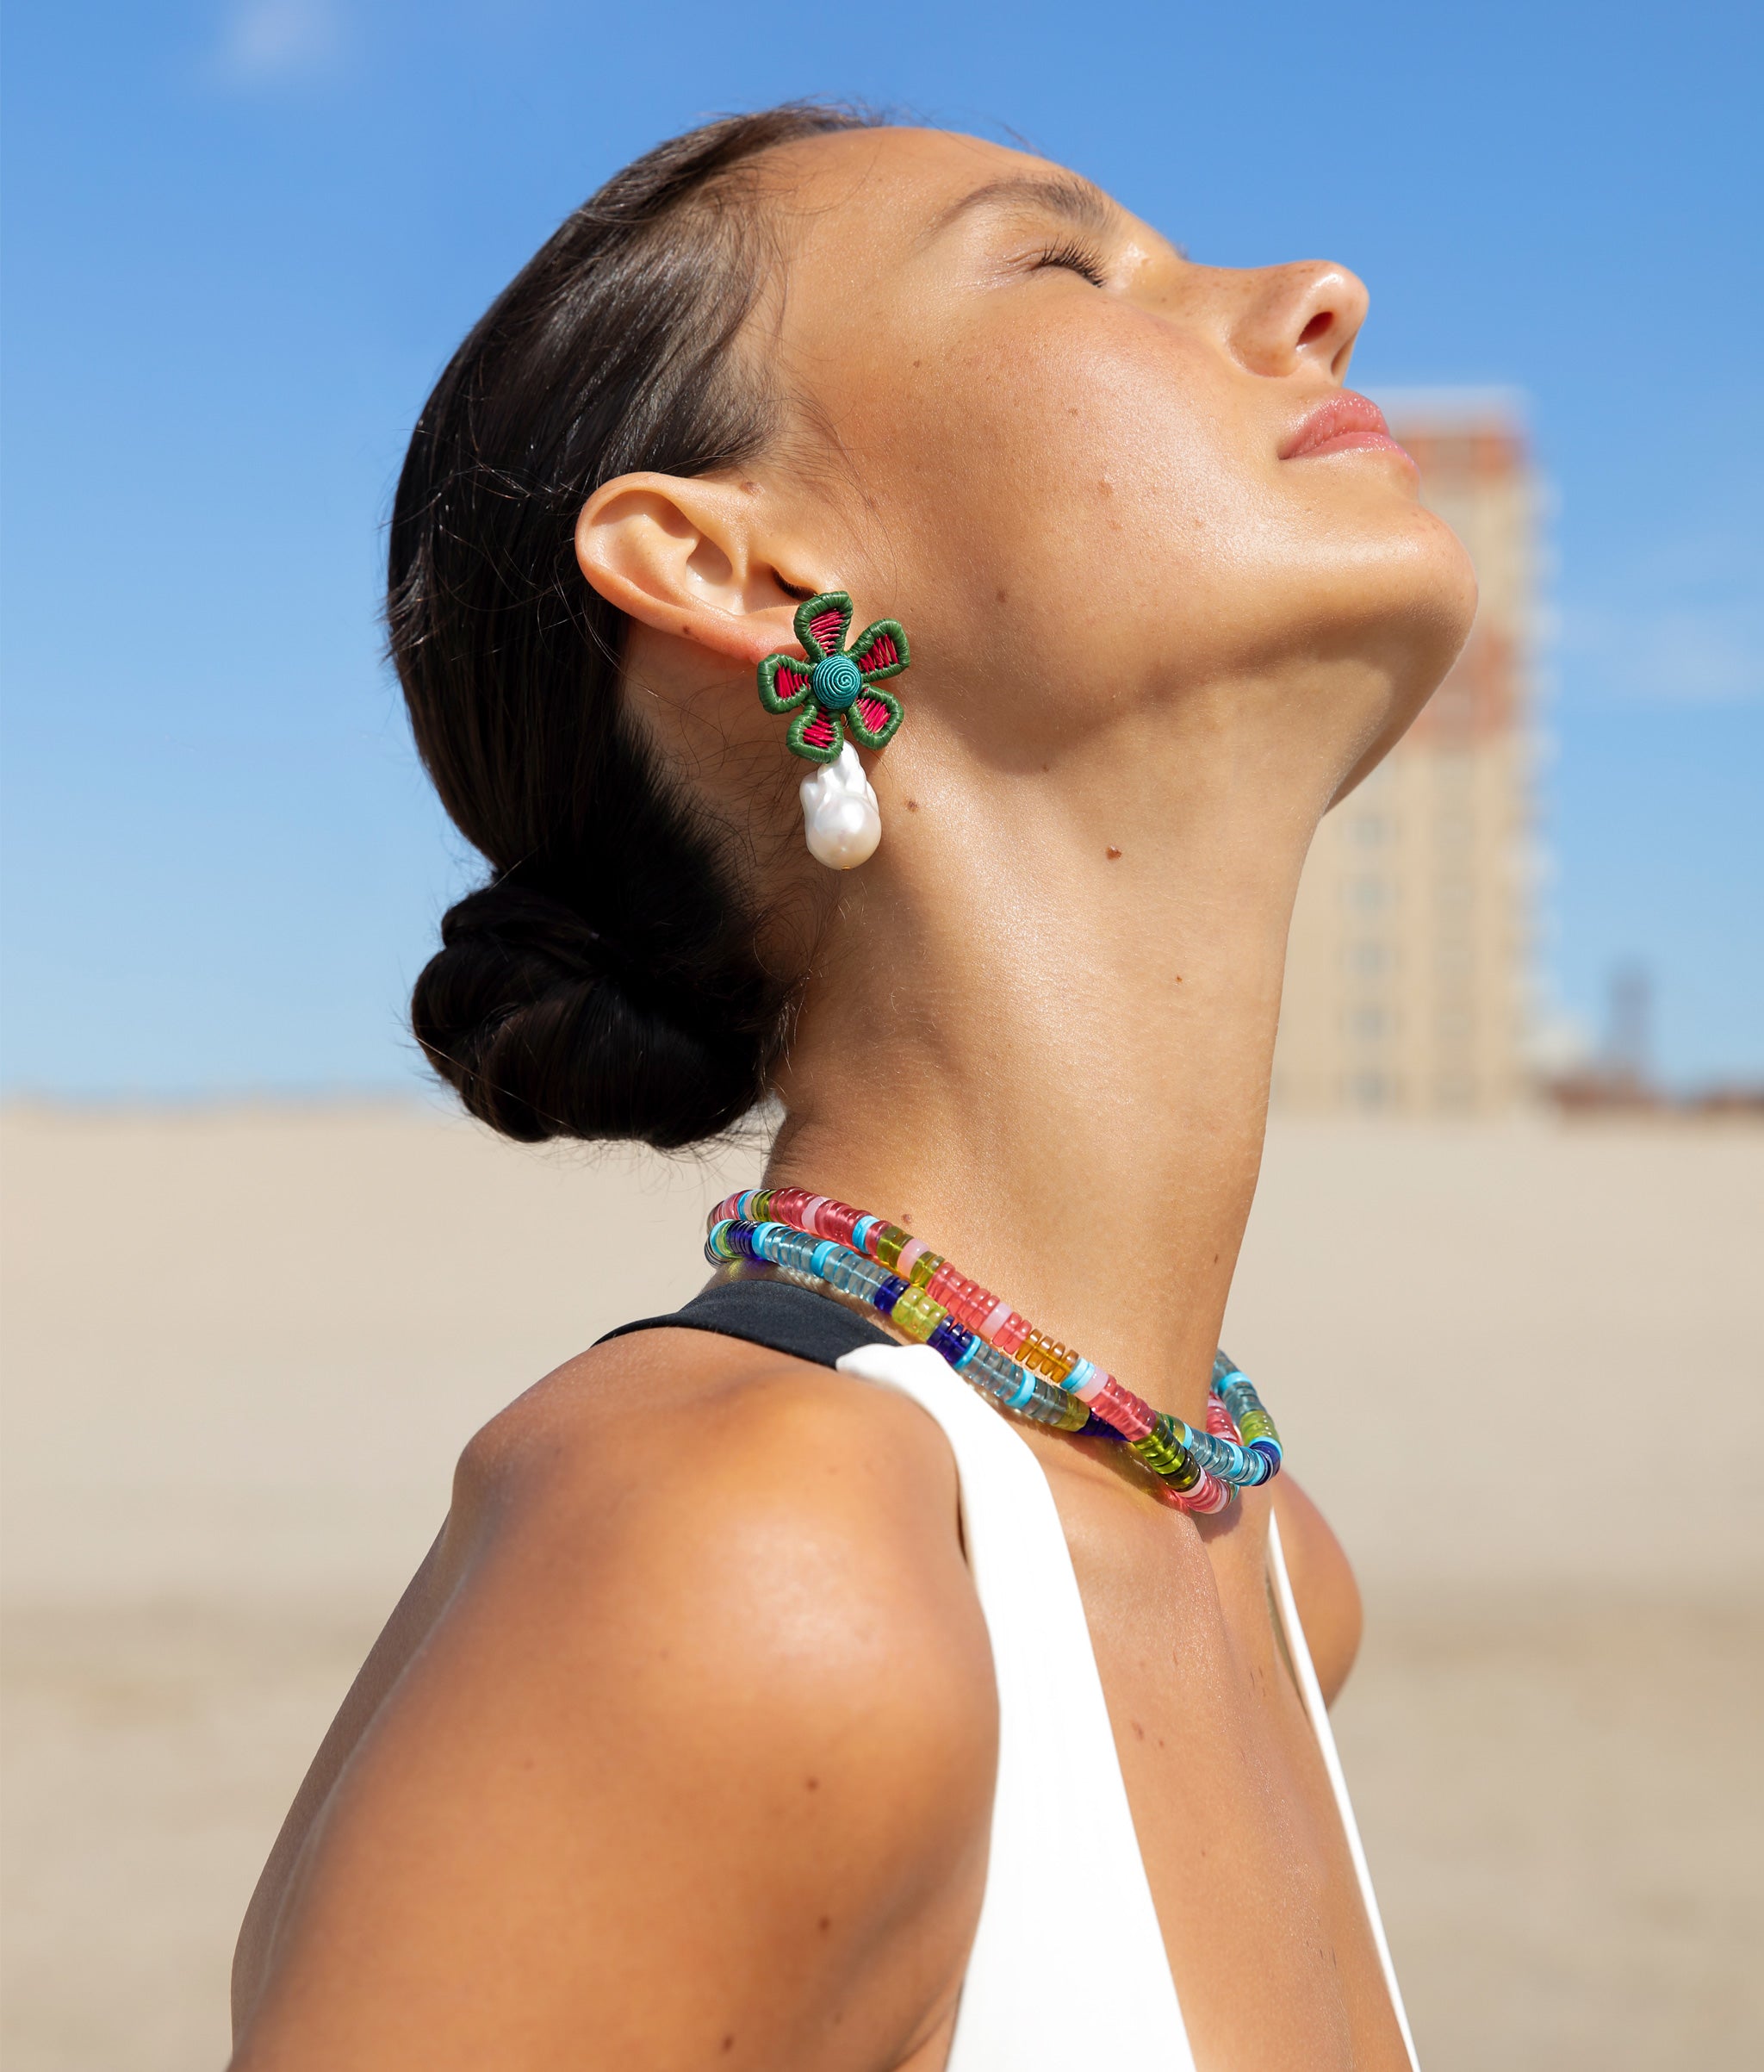 Model shown wearing Crown Daisy Earrings in Macaw paired with Agosto Necklaces in Watermelon and High Tide.